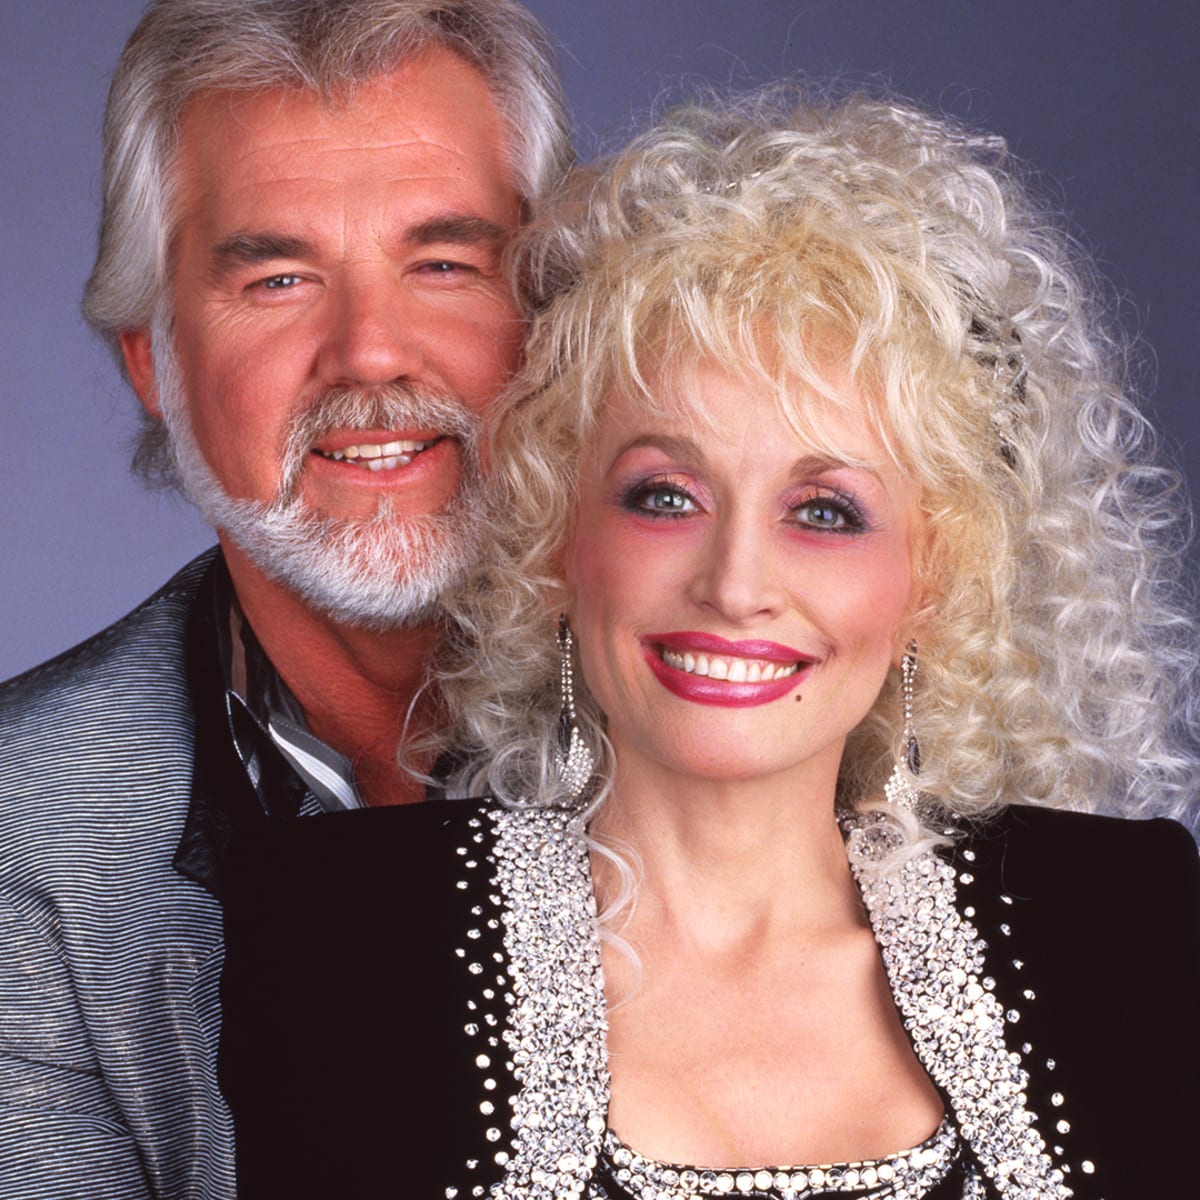 #NP @DollyParton & Kenny Rogers - The greatest gift of all #KBCweekende...